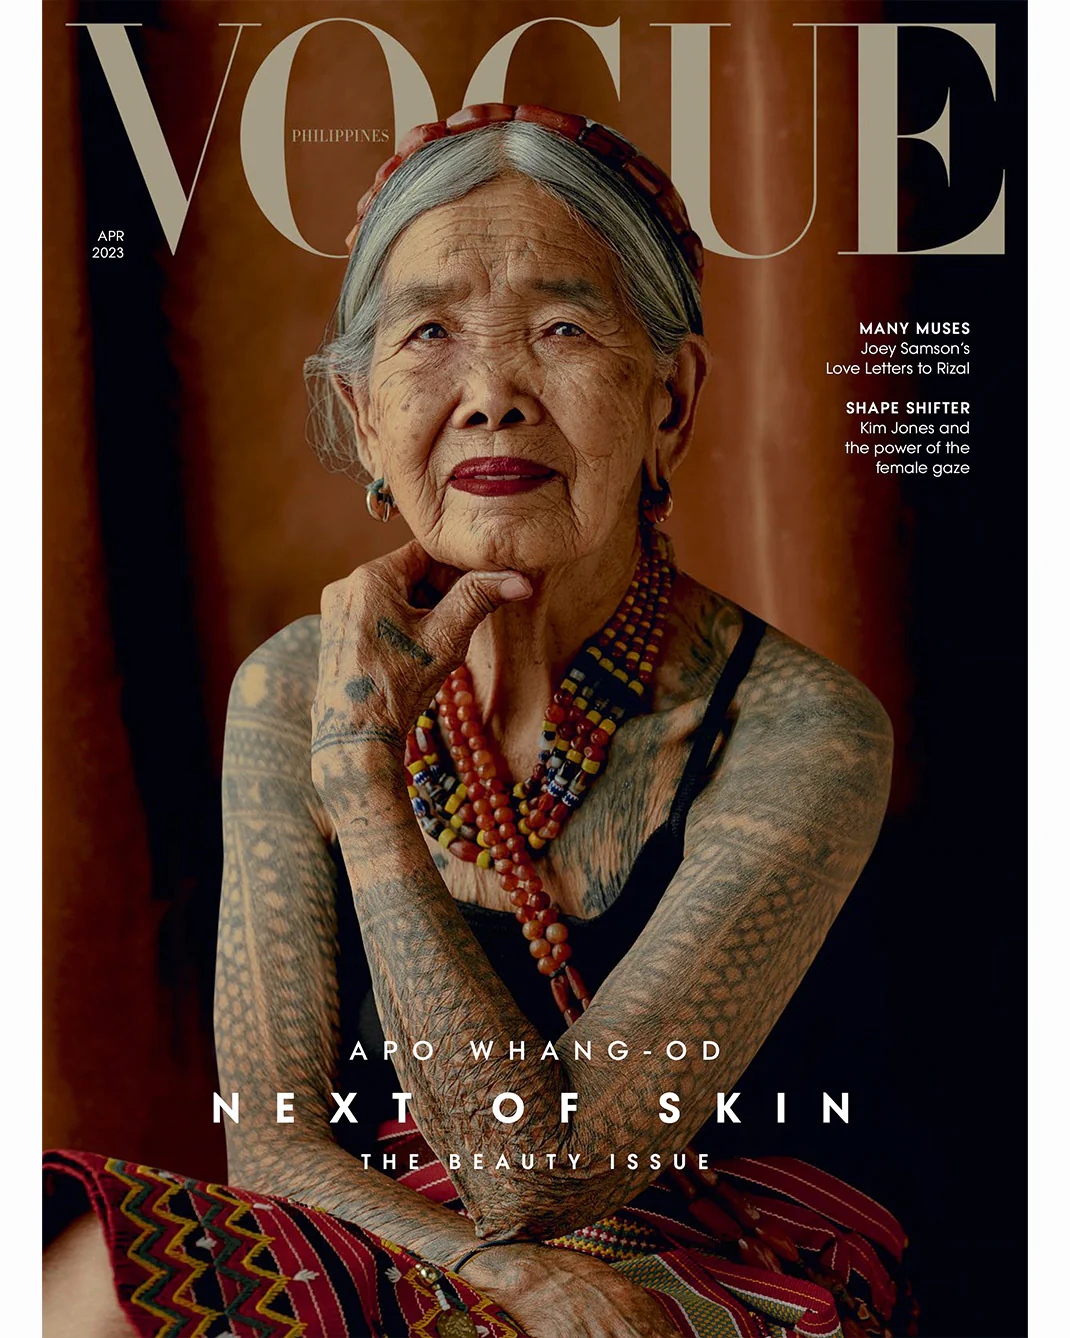 Vogue Philippines: the beauty of humanity